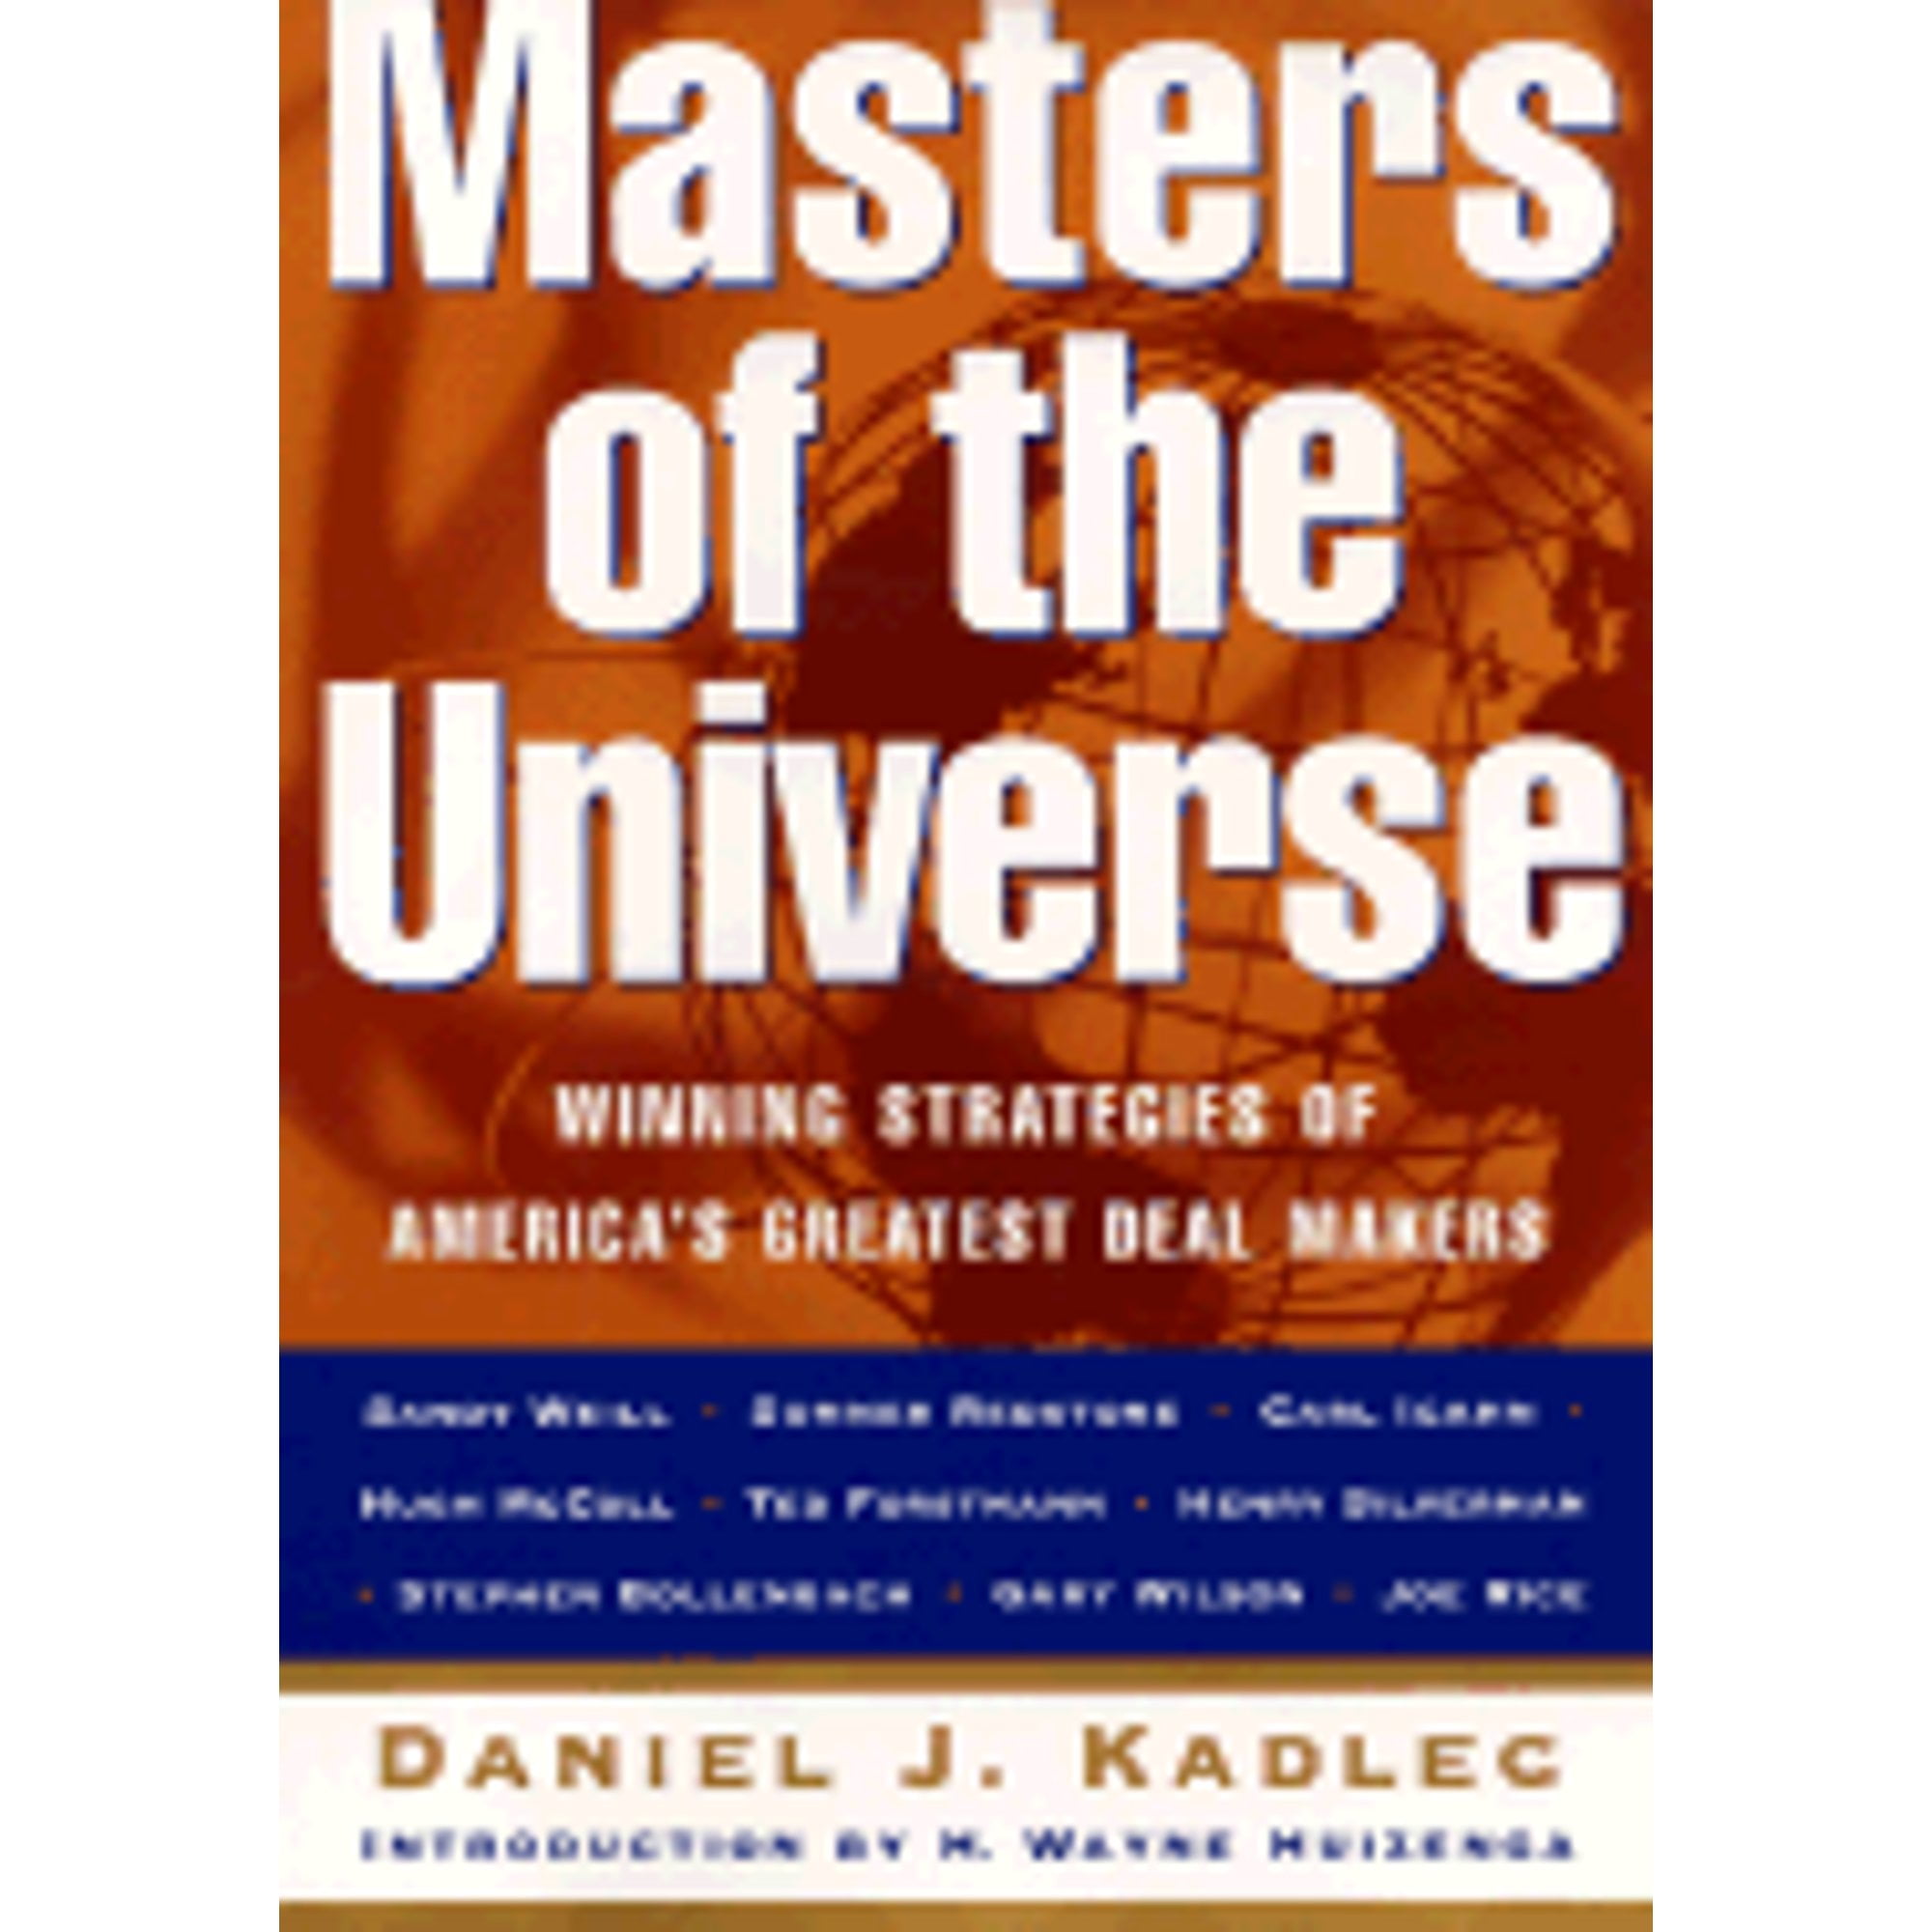 Pre-Owned Masters of the Universe: Winning Strategies America's Greatest Deal Makers (Hardcover 9780887309335) by Daniel J Kadlec